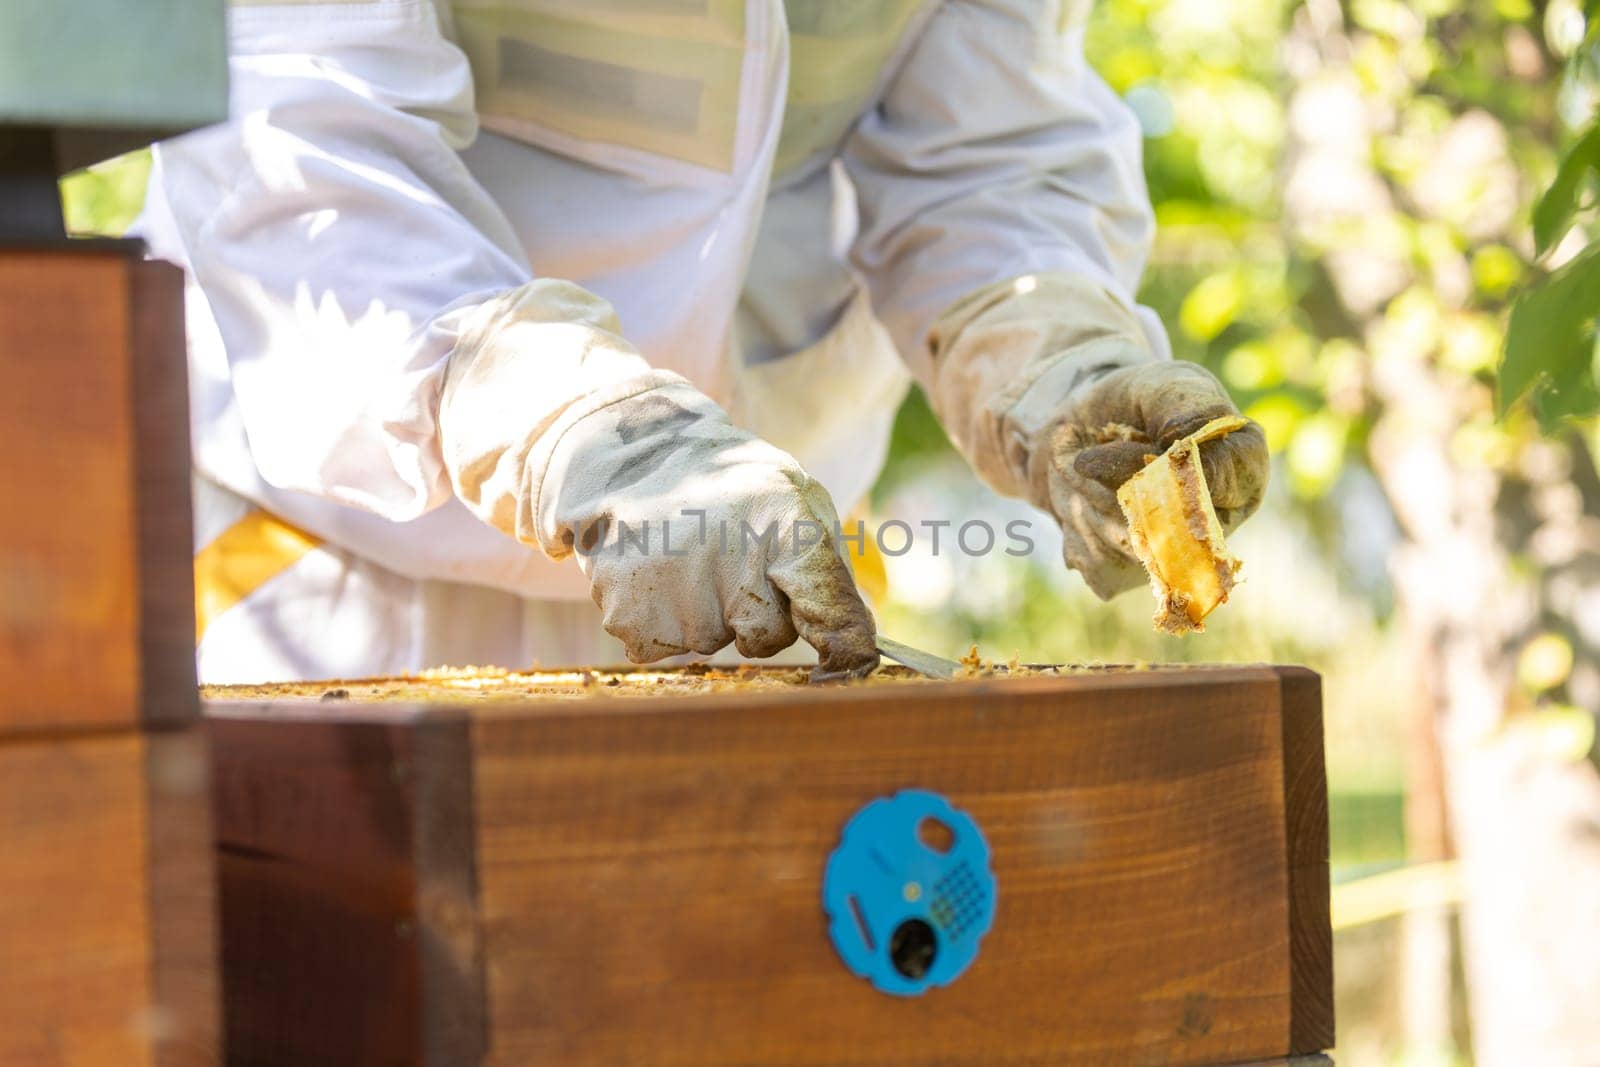 Beekeeper doing maintenance on his huge an apiary, removing old medication from honey comb, beekeeping concept